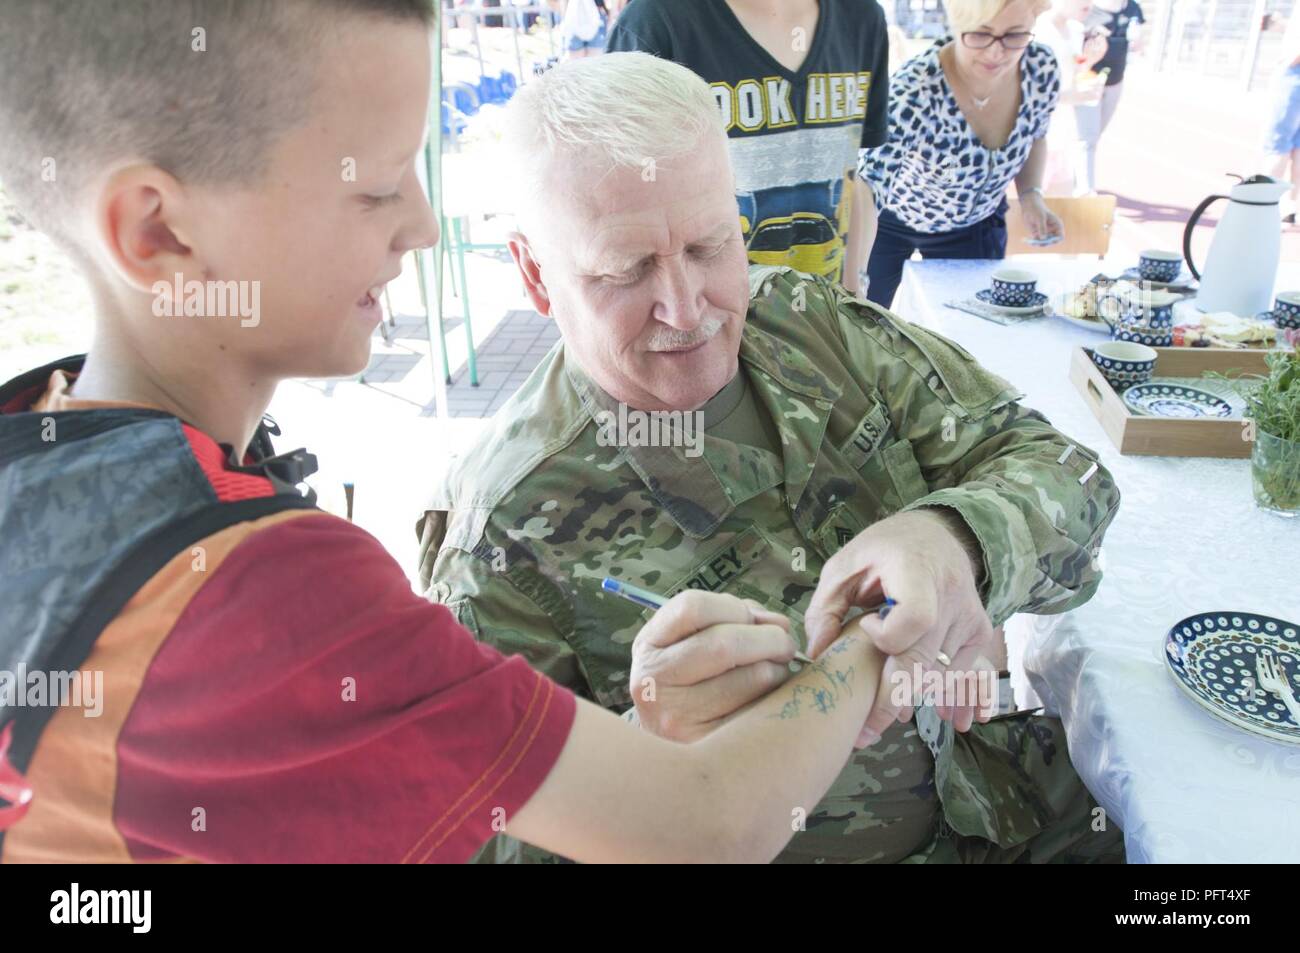 U.S. Army Sgt. Maj. Samuel Farley, logistics noncommissioned officer in charge for Resolute Castle 2018, assigned to 218th Maneuver Enhancement Brigade, South Carolina Army National Guard, autographs a student’s arm during the Boleslawiec Primary School Number 4 festival in Boleslawiec, Poland, May 26, 2018. Resolute Castle 18 Soldiers were special guests of the festival and participated in sporting events and pottery painting with the primary school children. Stock Photo